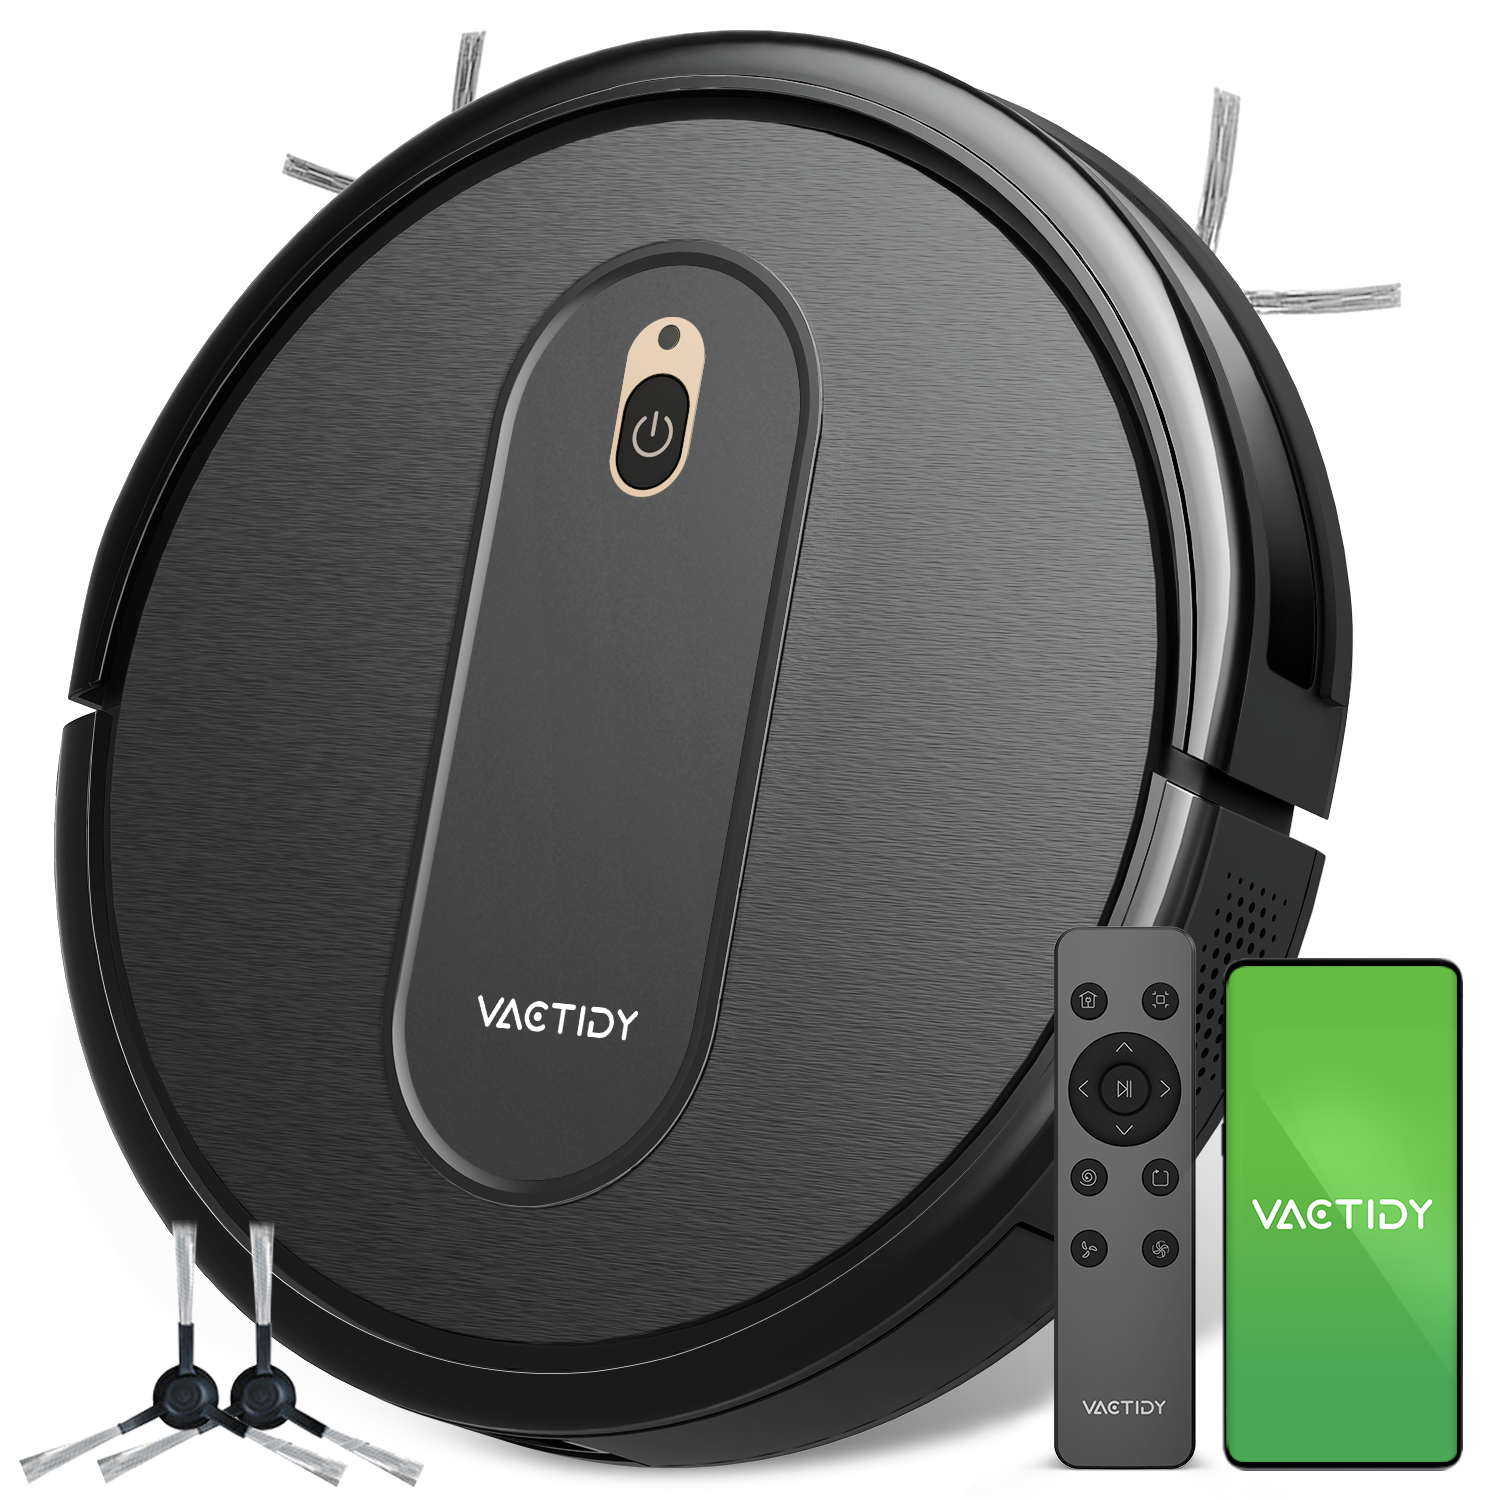 

Vactidy T6 Robot Vacuum Cleaner 2000Pa Suction 500ml Dustbin Self-Charging 2500mAh Battery 100Mins Runtime App and Voice